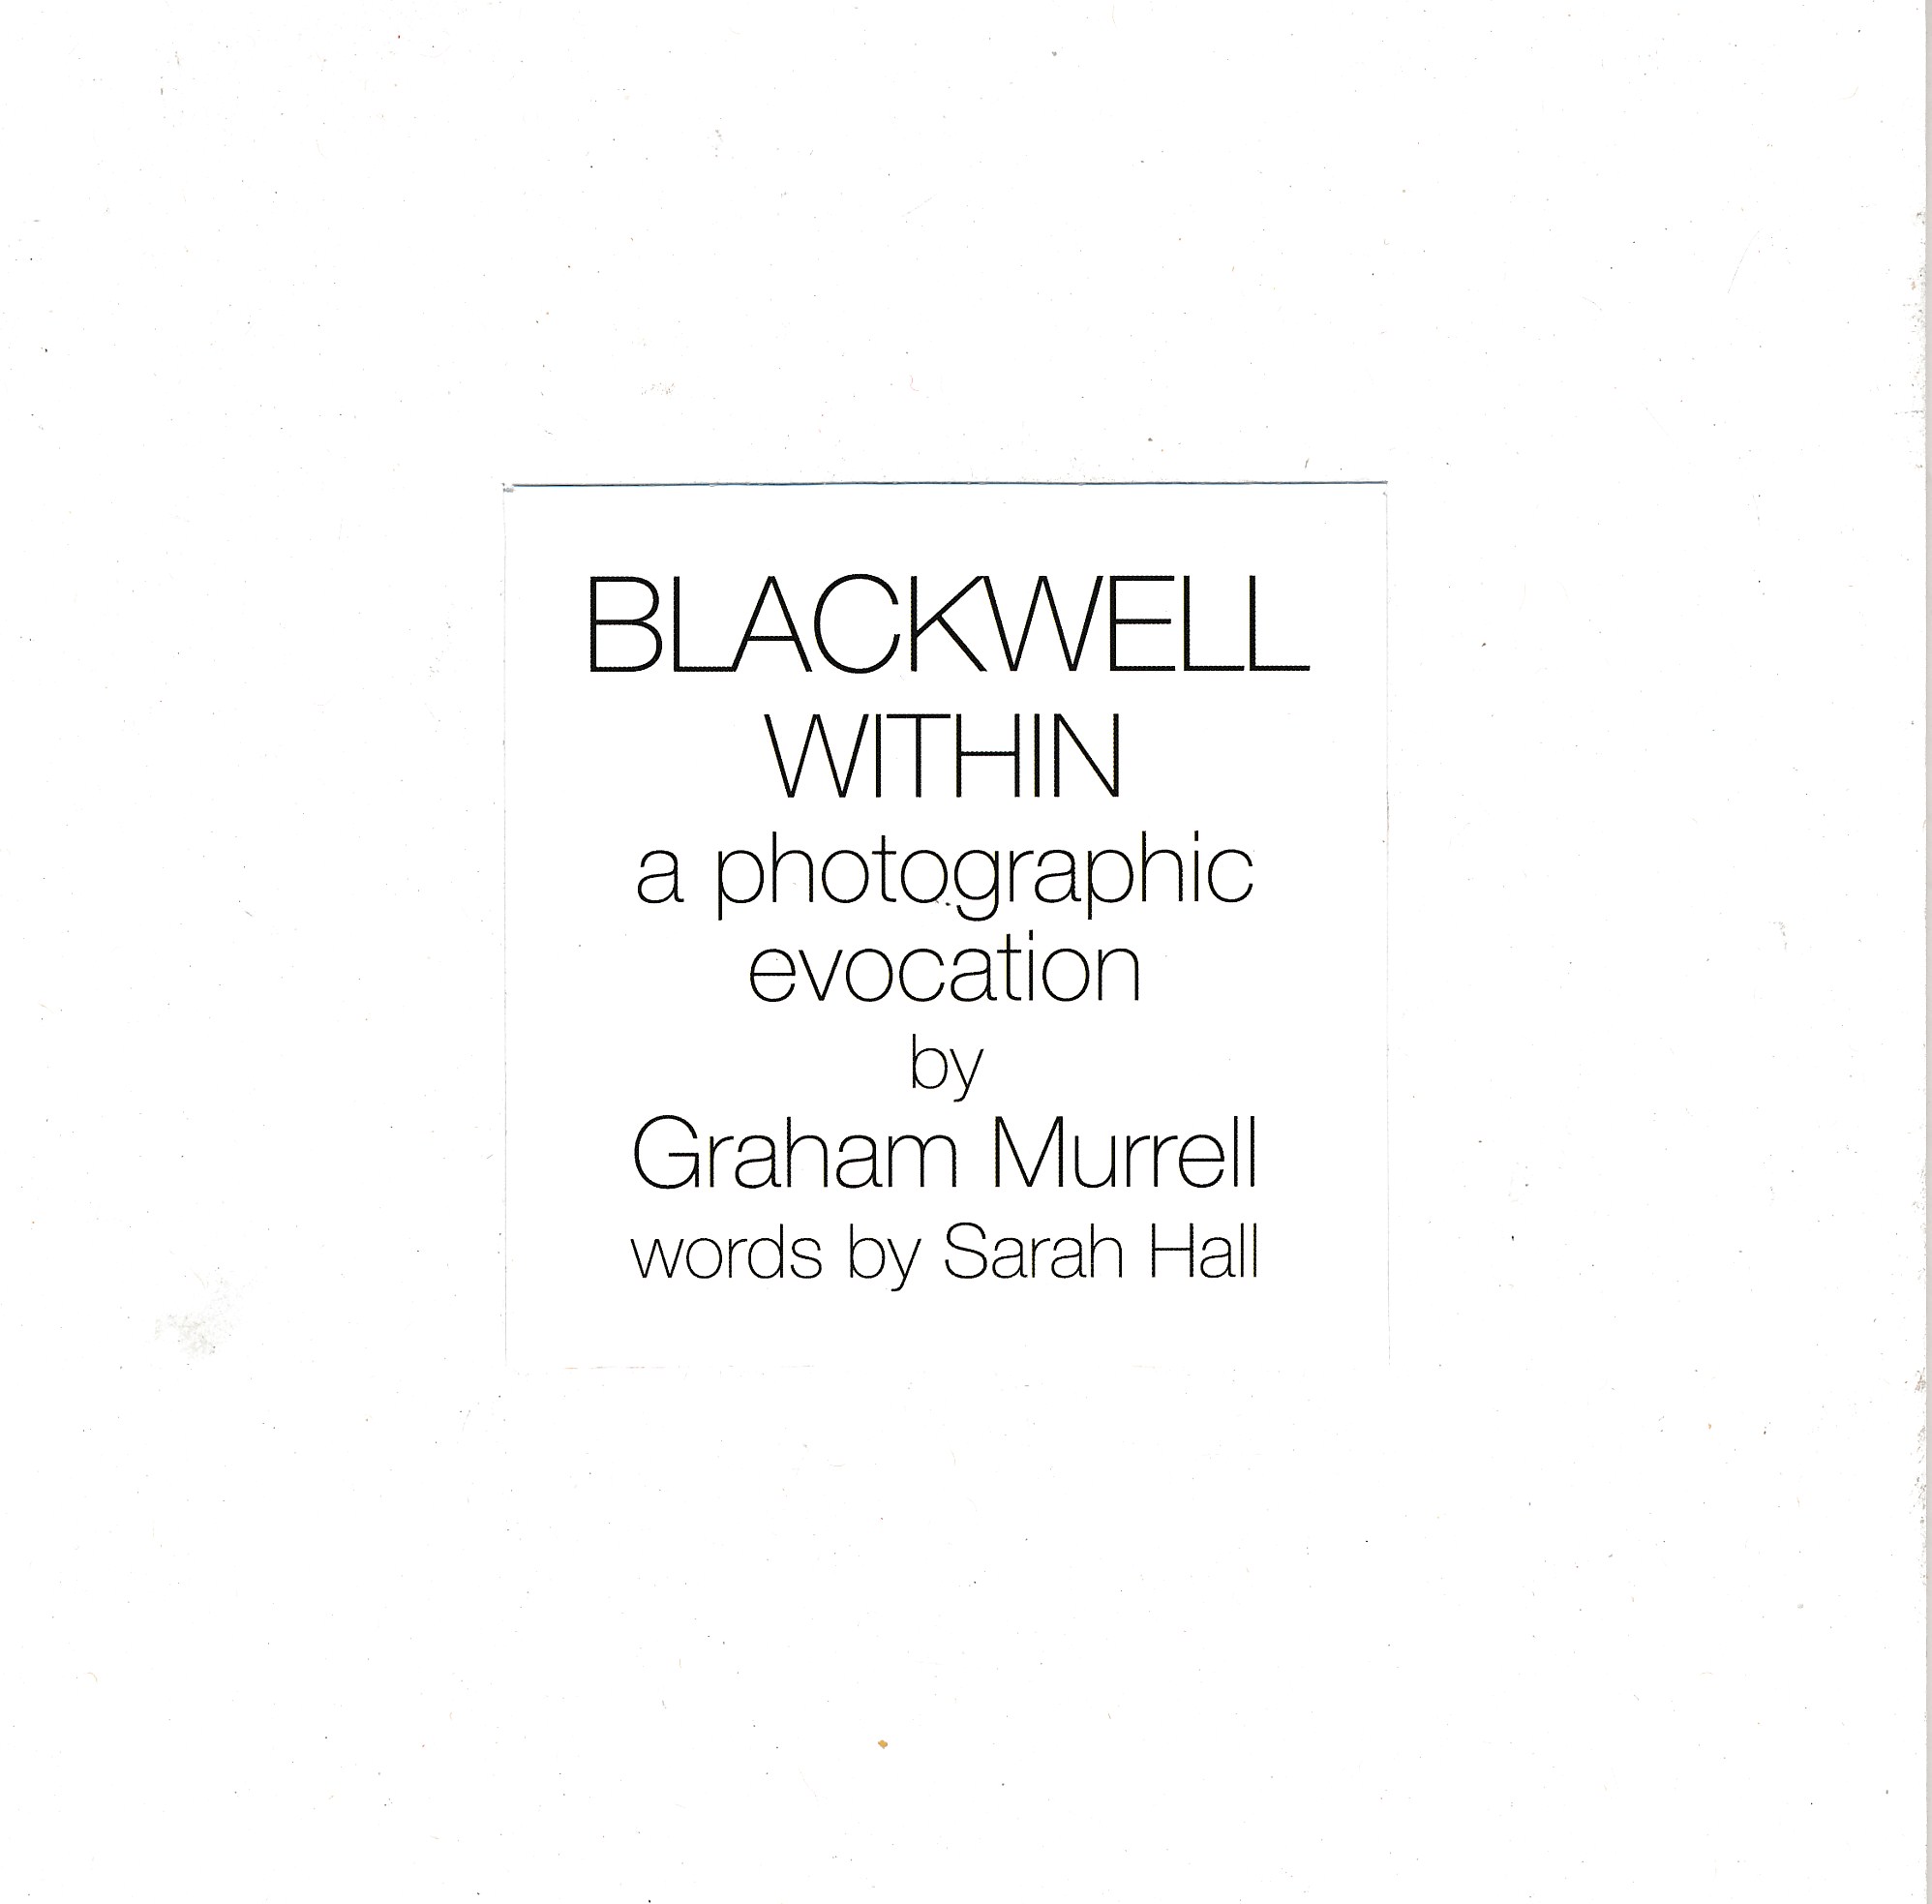 Blackwell Within: A Photographic Evocation.